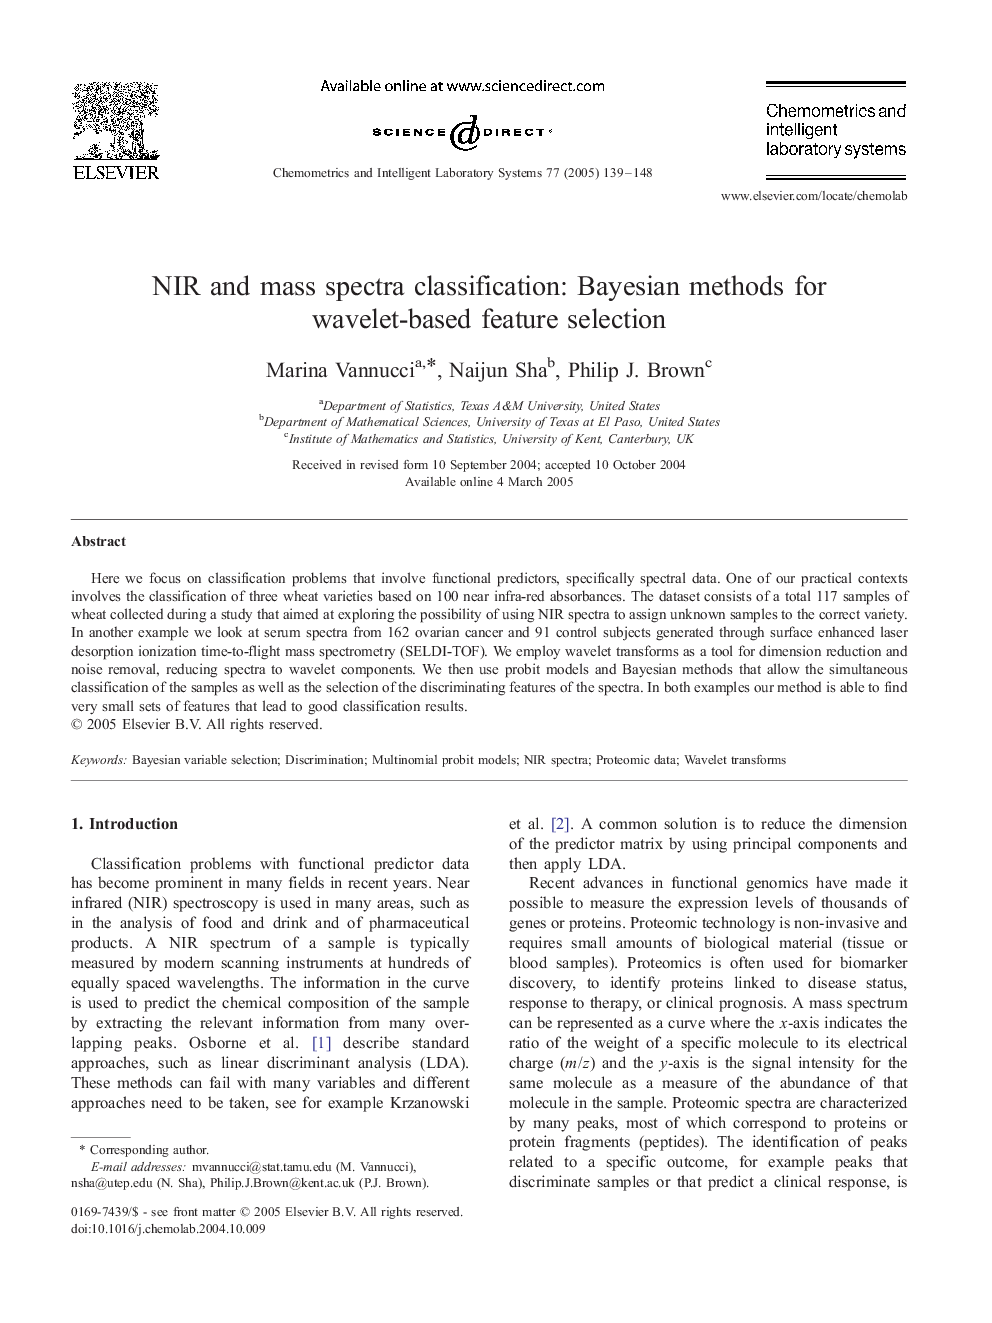 NIR and mass spectra classification: Bayesian methods for wavelet-based feature selection